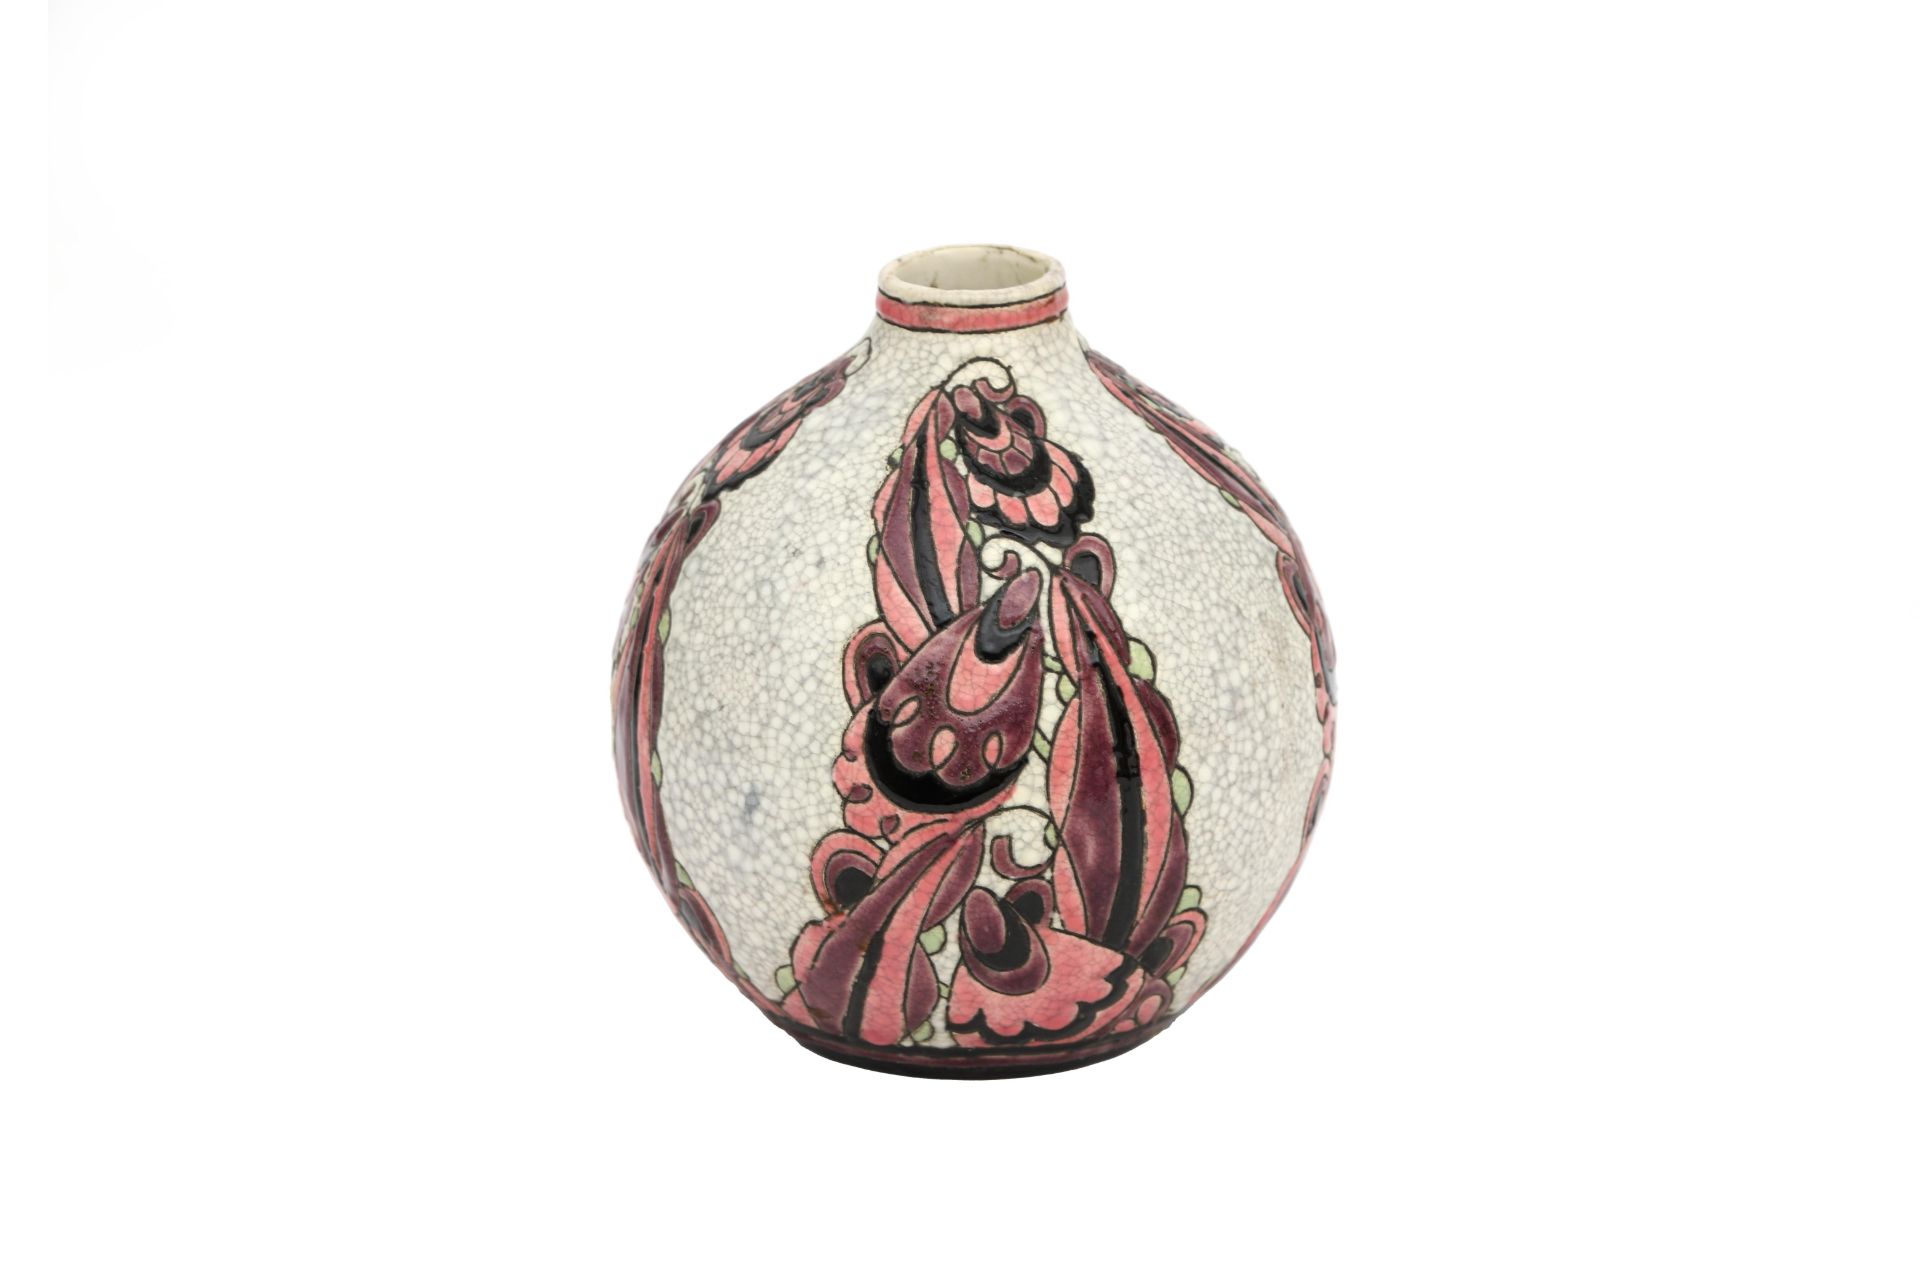 Charles Catteau (1880-1966) A globular glazed ceramic vase with short neck, decorated with four